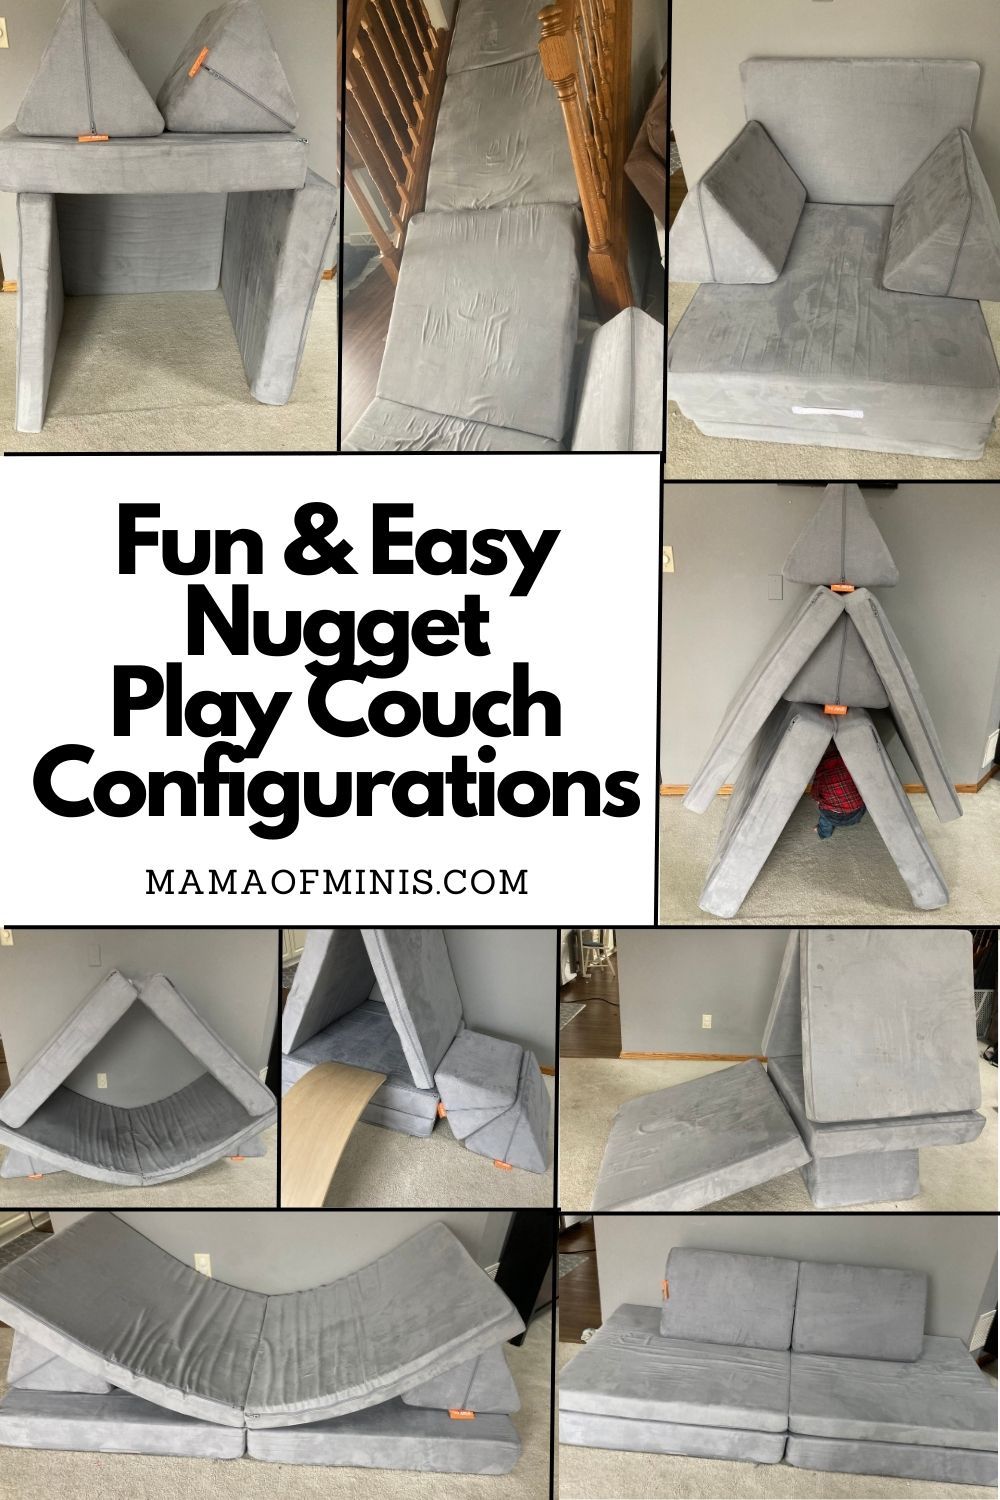 Fun & Easy Nugget Play Couch Configurations